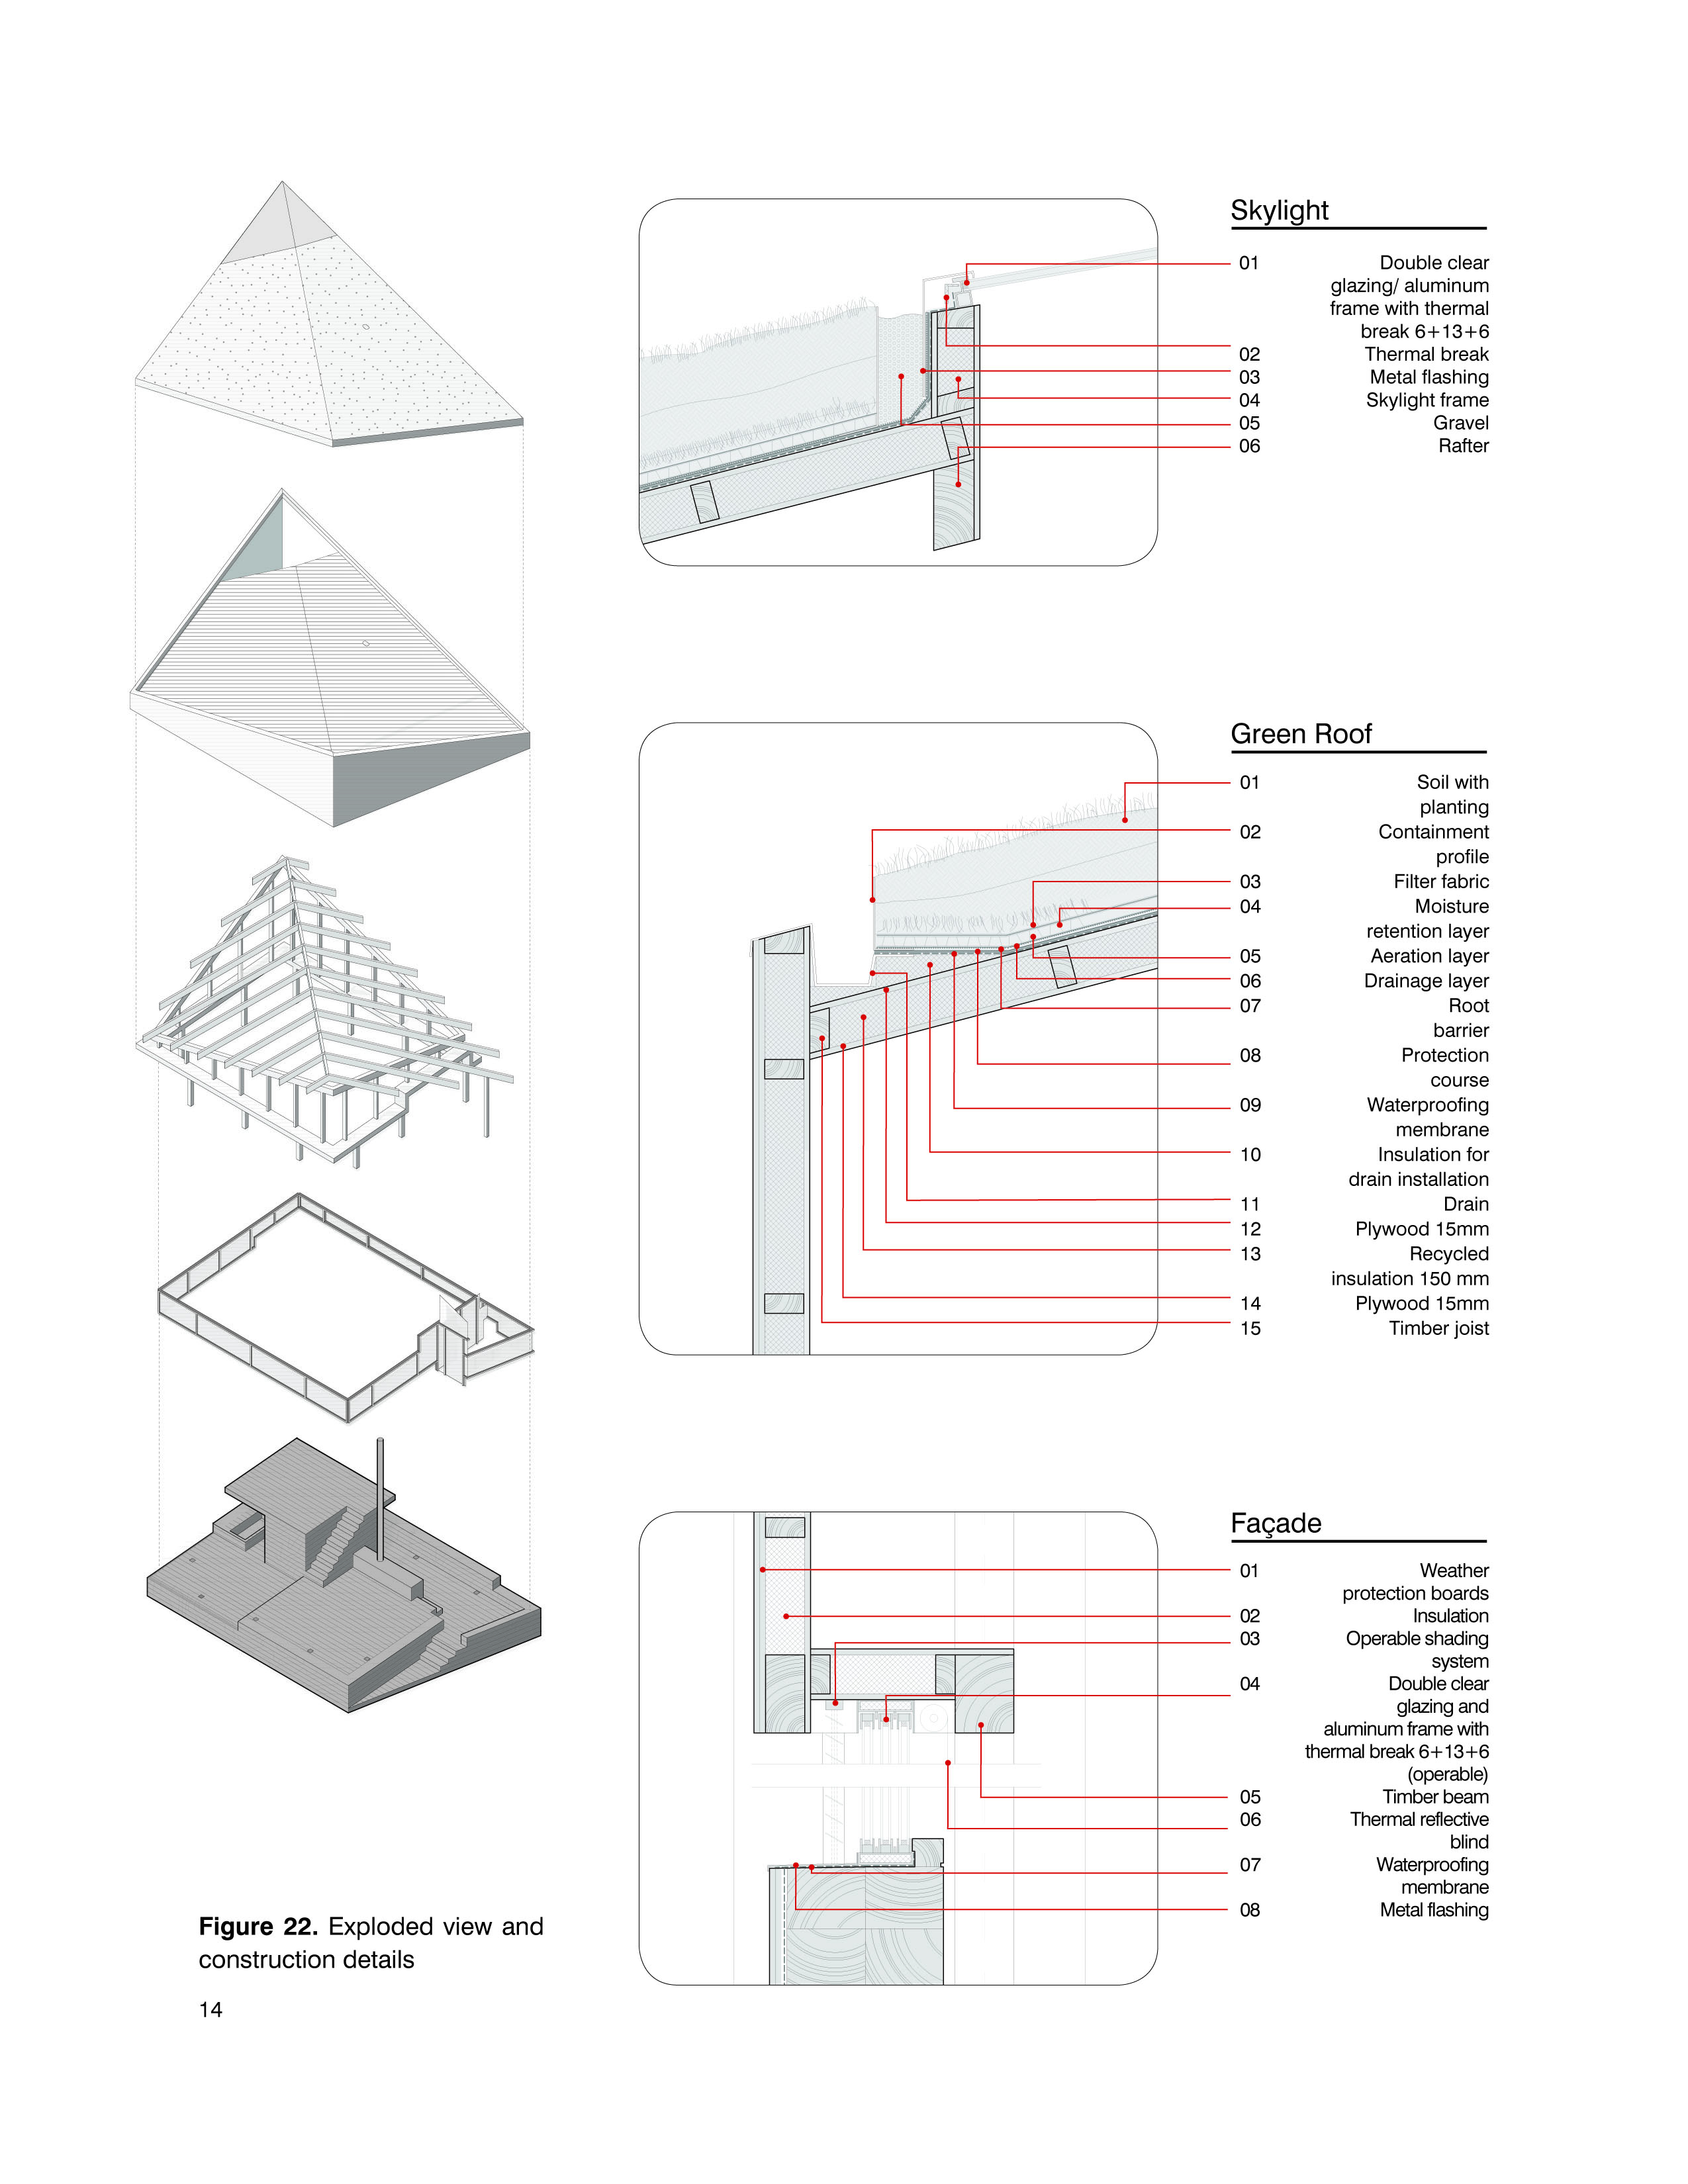 Applications of parametric design tools in Horizon House_Ana Garcia Puyol-Page14